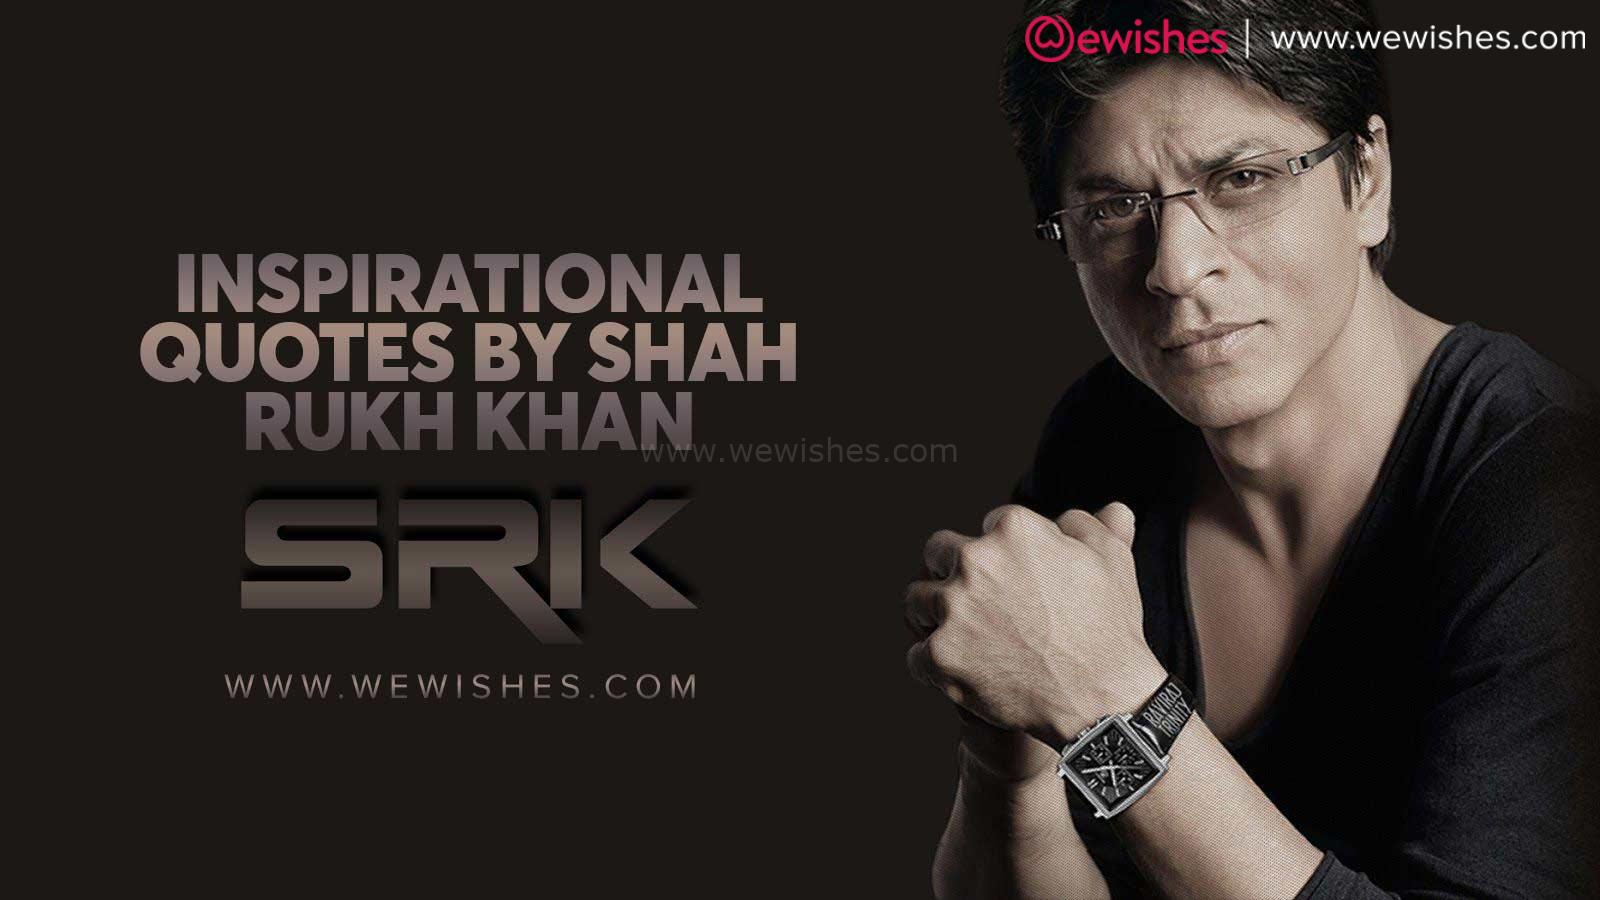 Inspirational Quotes by Shah Rukh Khan